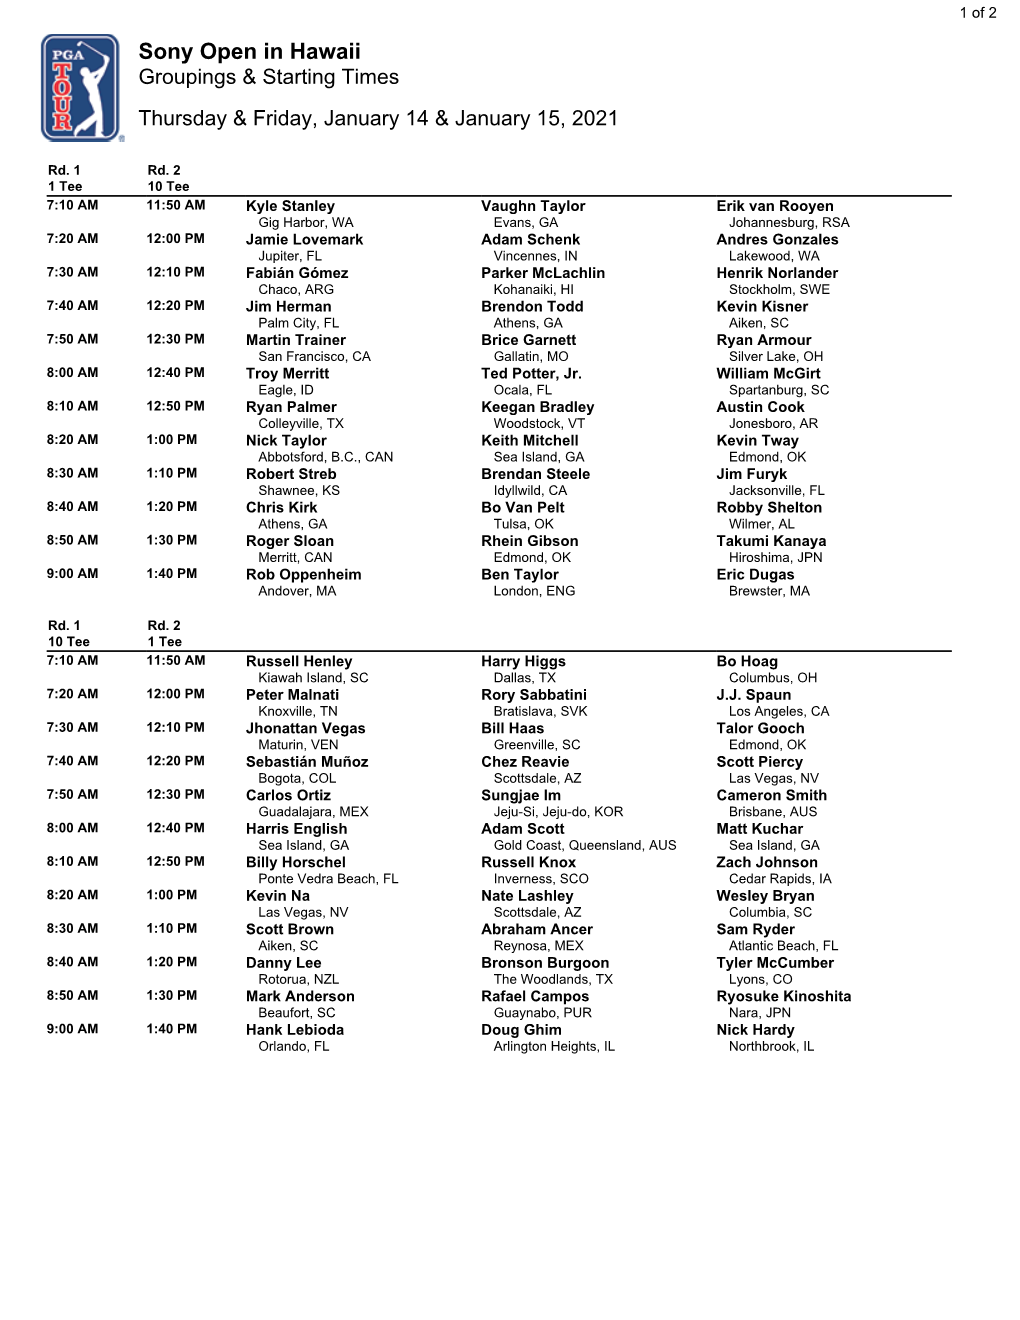 Sony Open in Hawaii Groupings & Starting Times Thursday & Friday, January 14 & January 15, 2021